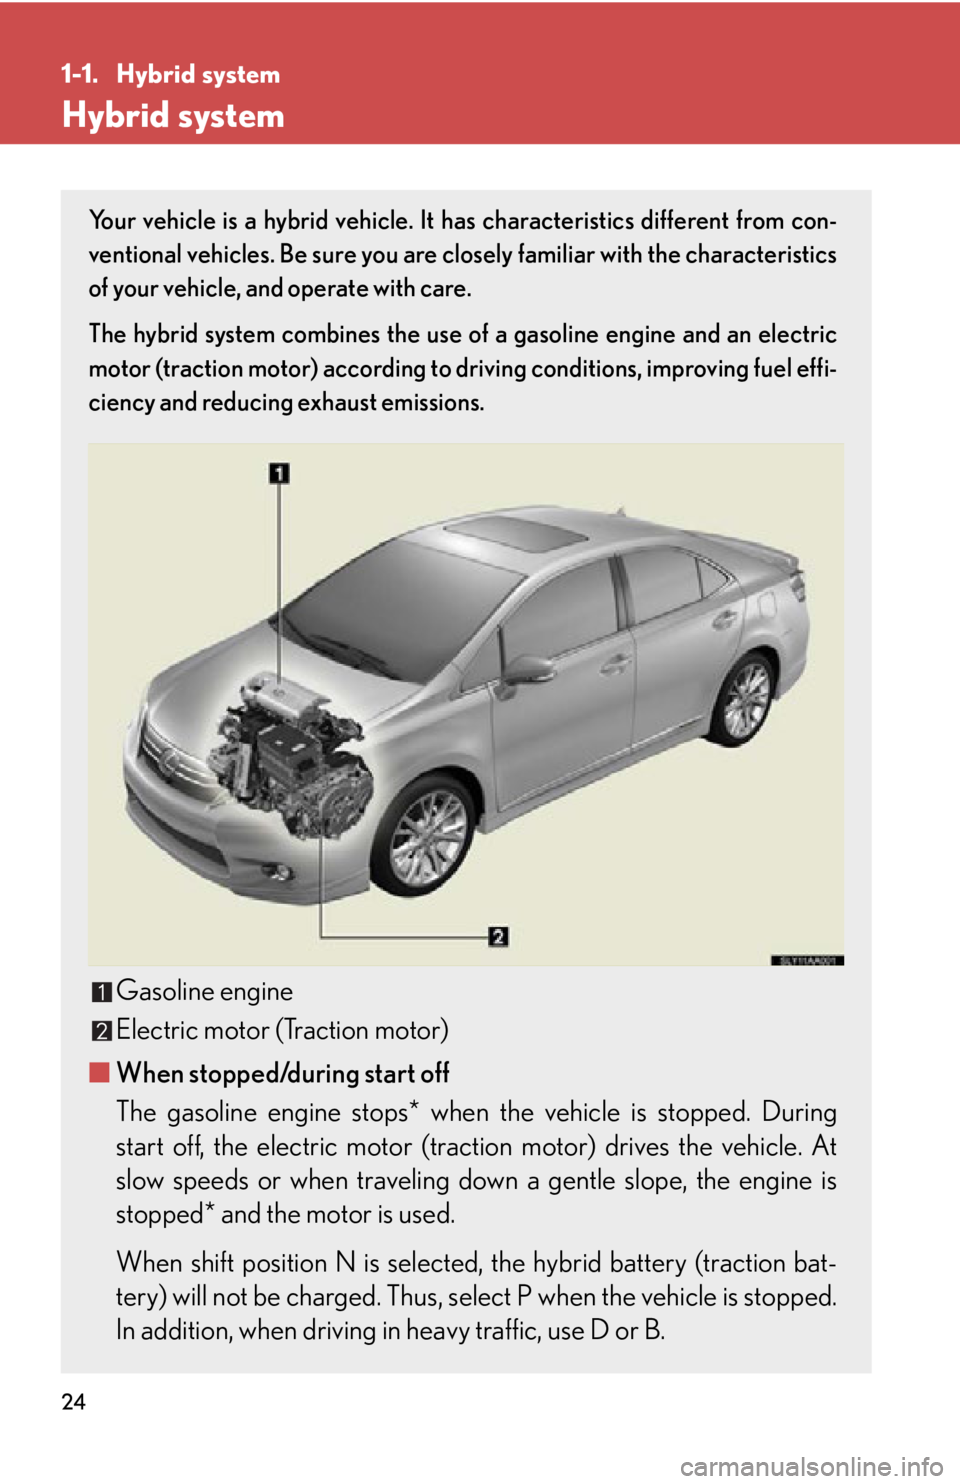 Lexus HS250h 2011  Do-it-yourself maintenance / LEXUS 2011 HS250H  (OM75037U) Owners Manual 24
1-1. Hybrid system
Hybrid system
Your vehicle is a hybrid vehicle. It has characteristics different from con-
ventional vehicles. Be sure you are clos ely familiar with the characteristics
of your 